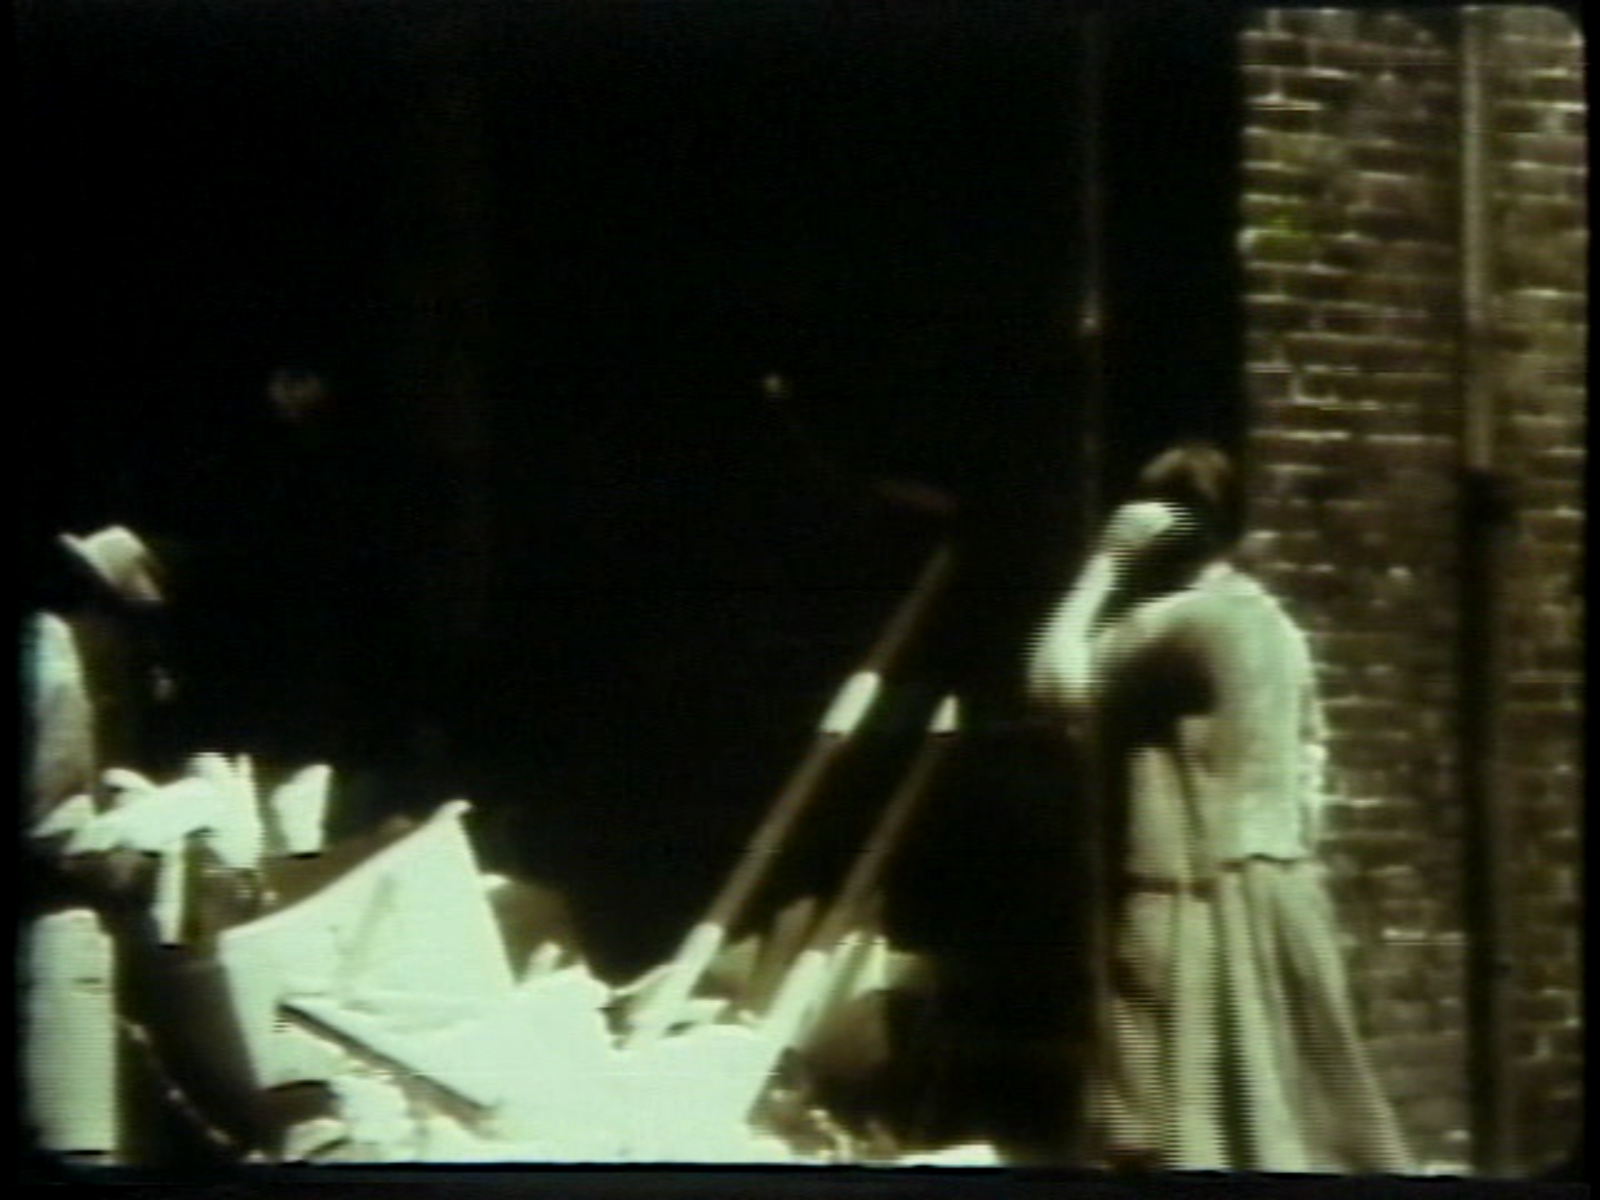 Ian Wallace, Poverty 1980 (still), 1980, 16mm film transferred to digital, dimensions variable